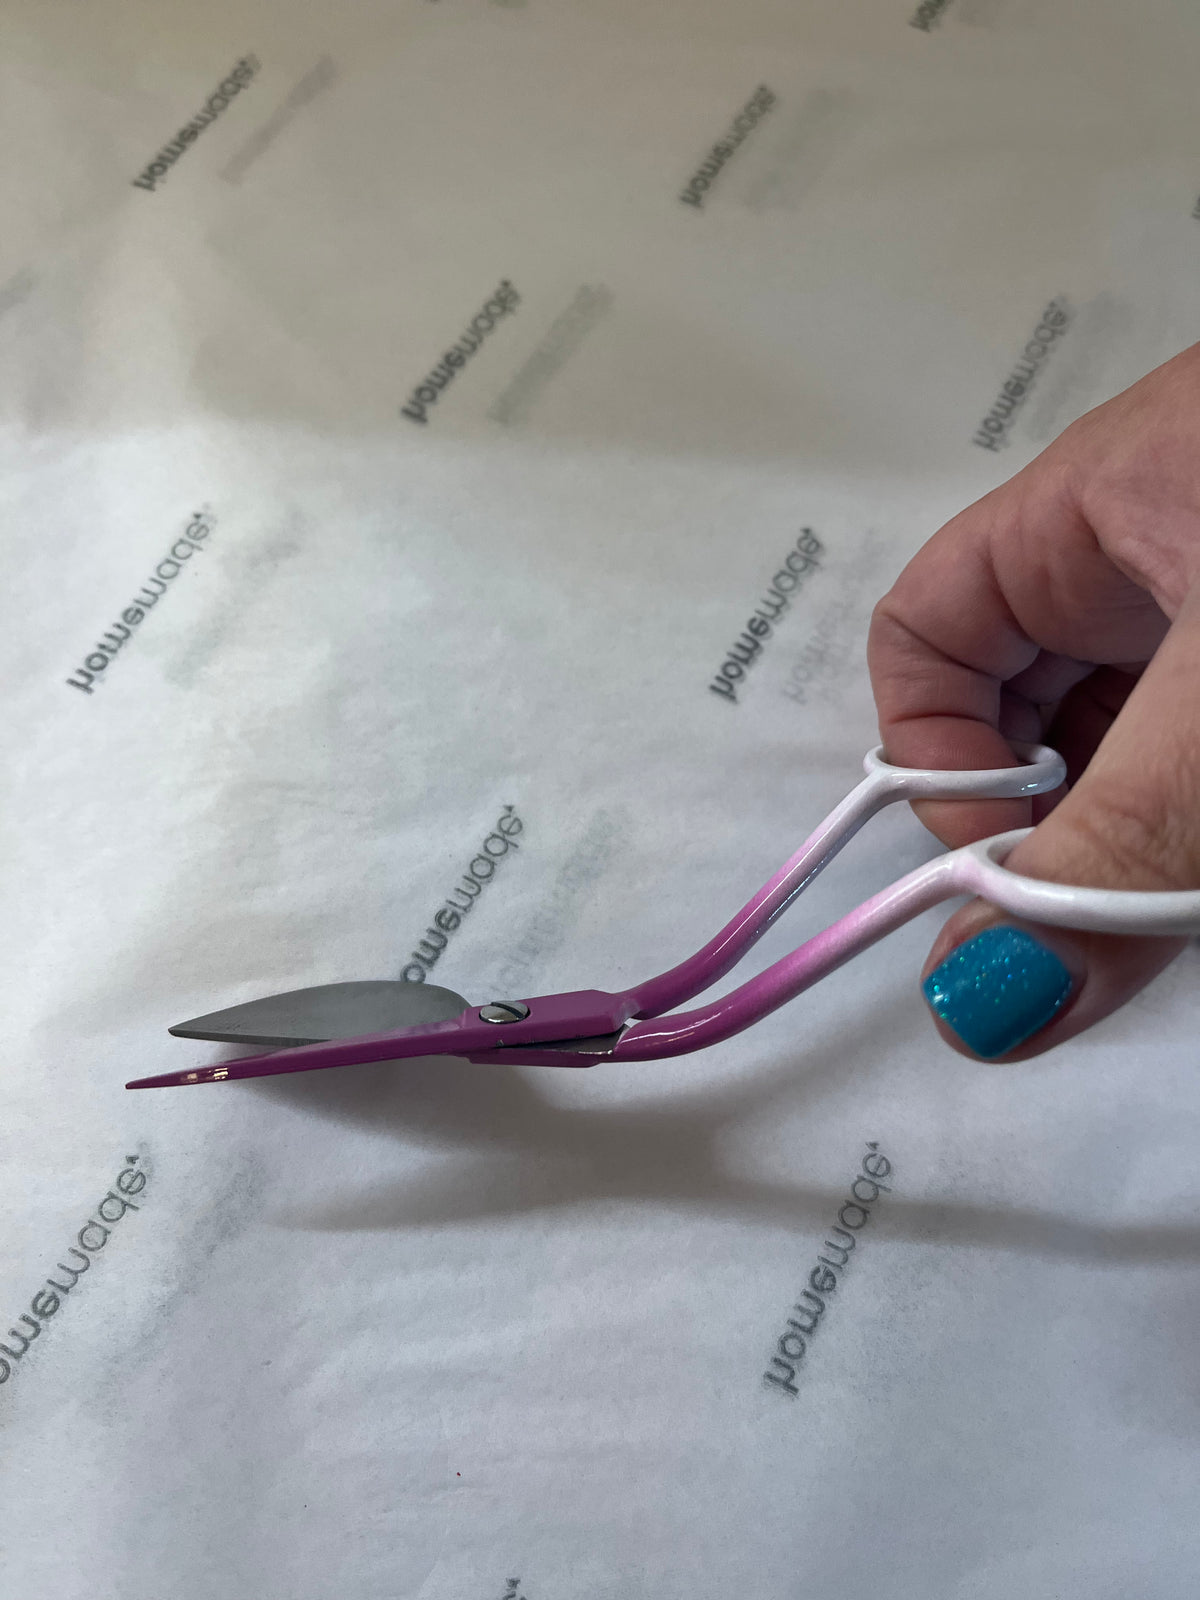 Duckbill  Scissors - with Homemade symbol in Pink